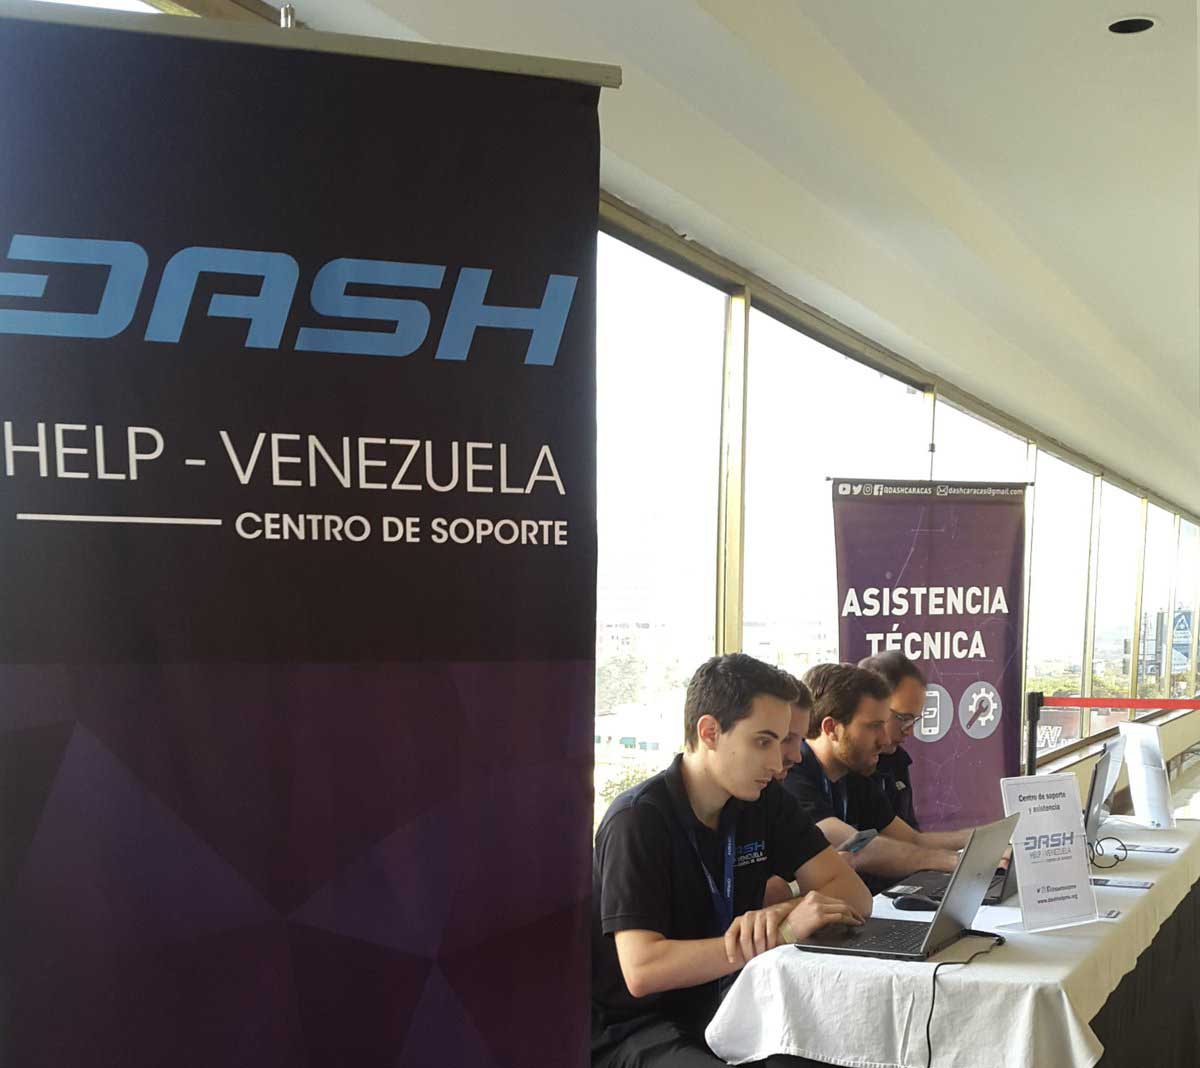 A group of young Venezuelan entrepreneurs are responsibles for the launch of the Dash support center